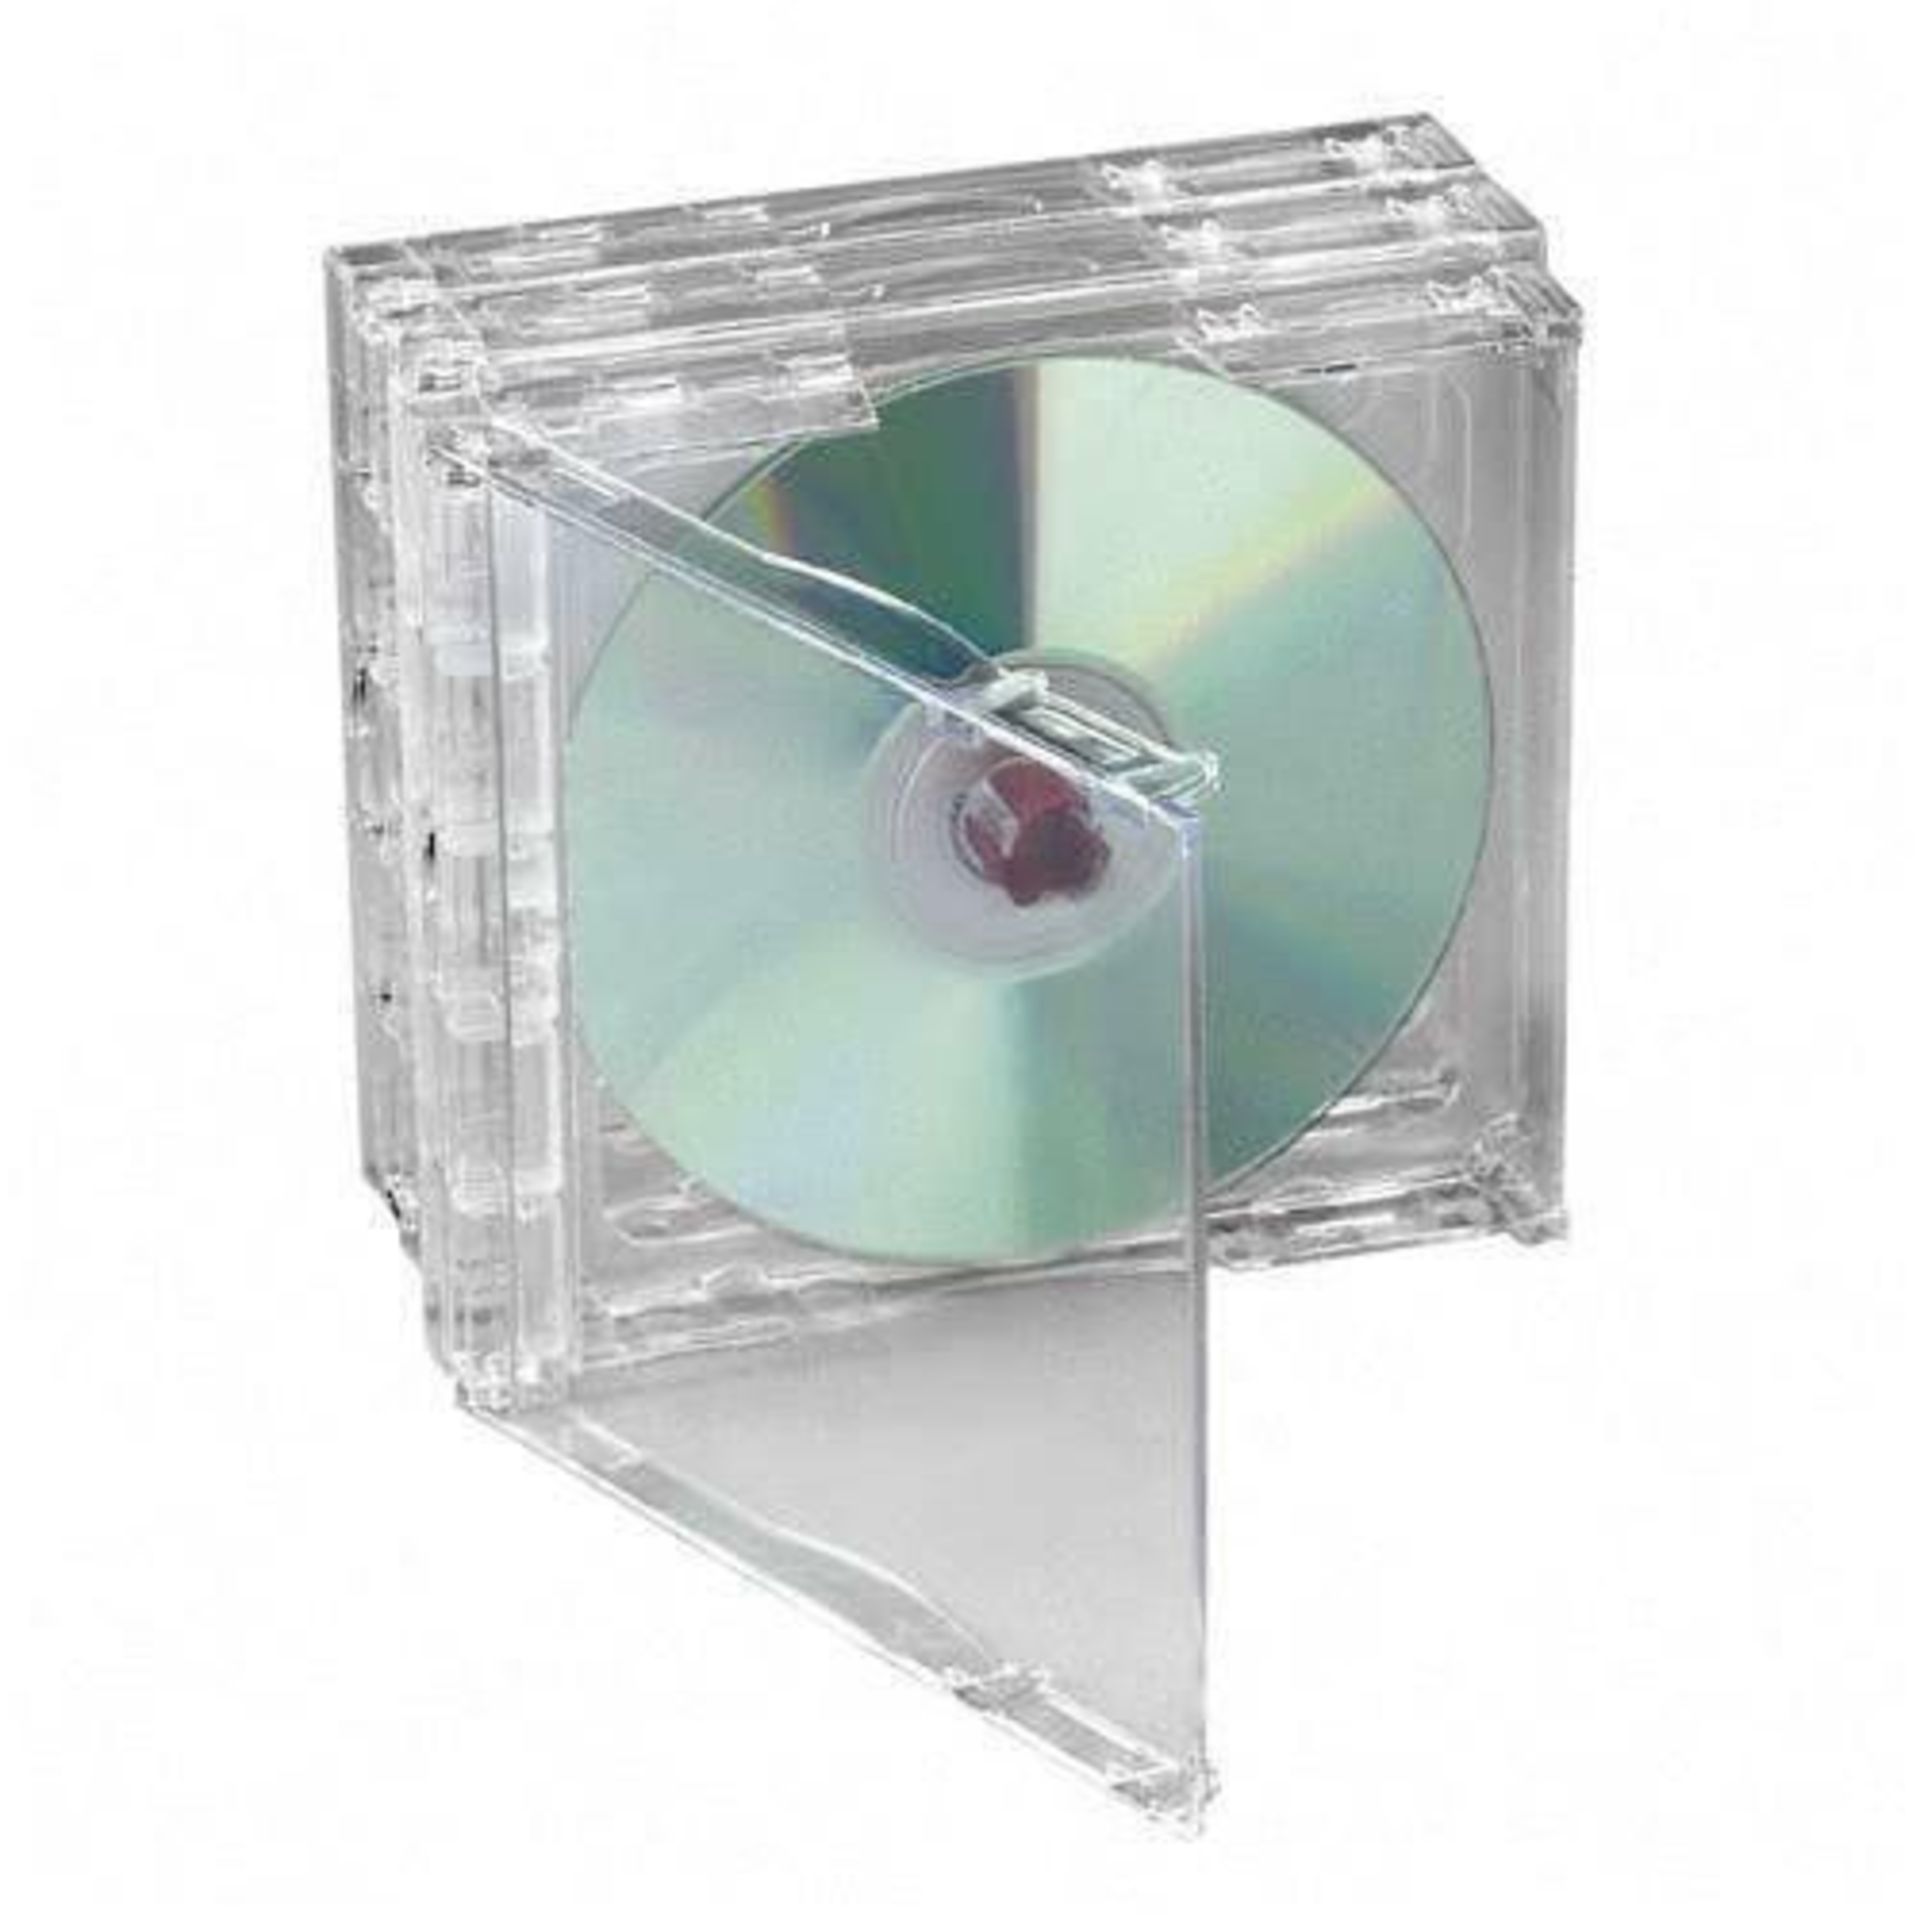 3 x Boxes of Compucessory Stackable CD Cases Code 95506 - 300 Cases in Total (RRP £5.50 Each)